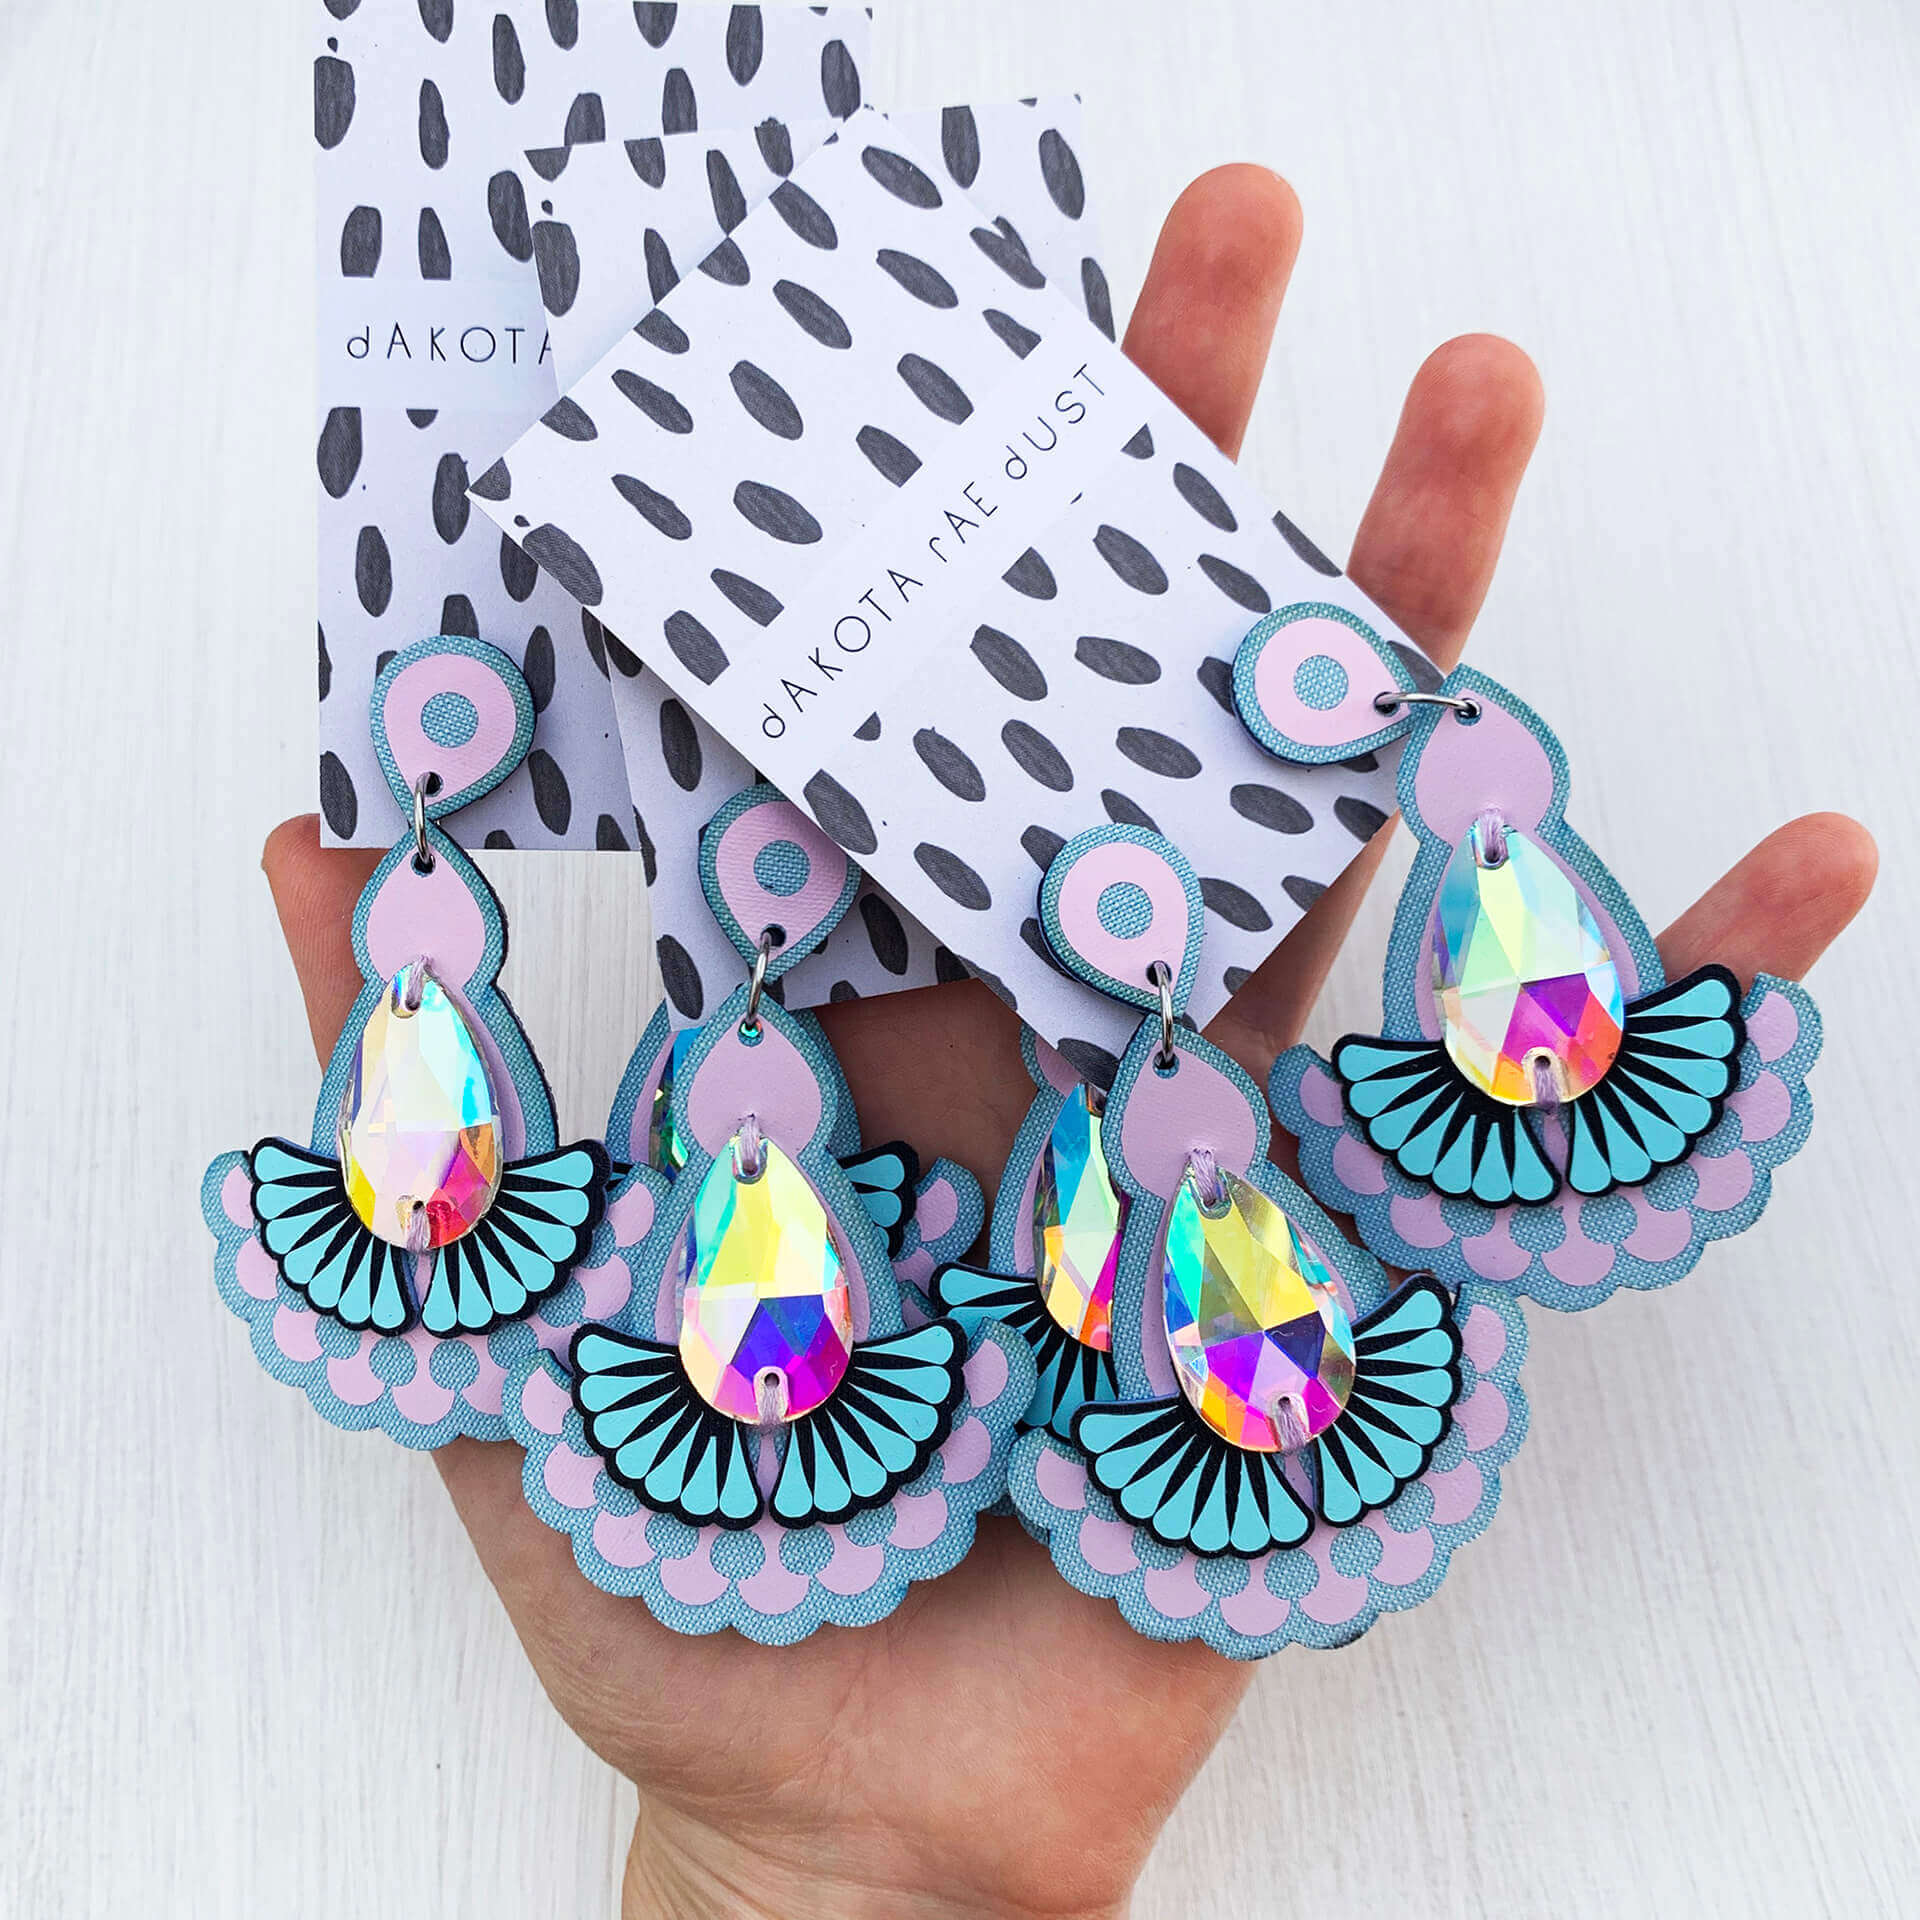 Several pairs of the same laser cut lilac and light blue jewelled statement earrings mounted on dakota rae dust branded cards are held in a woman's open hand